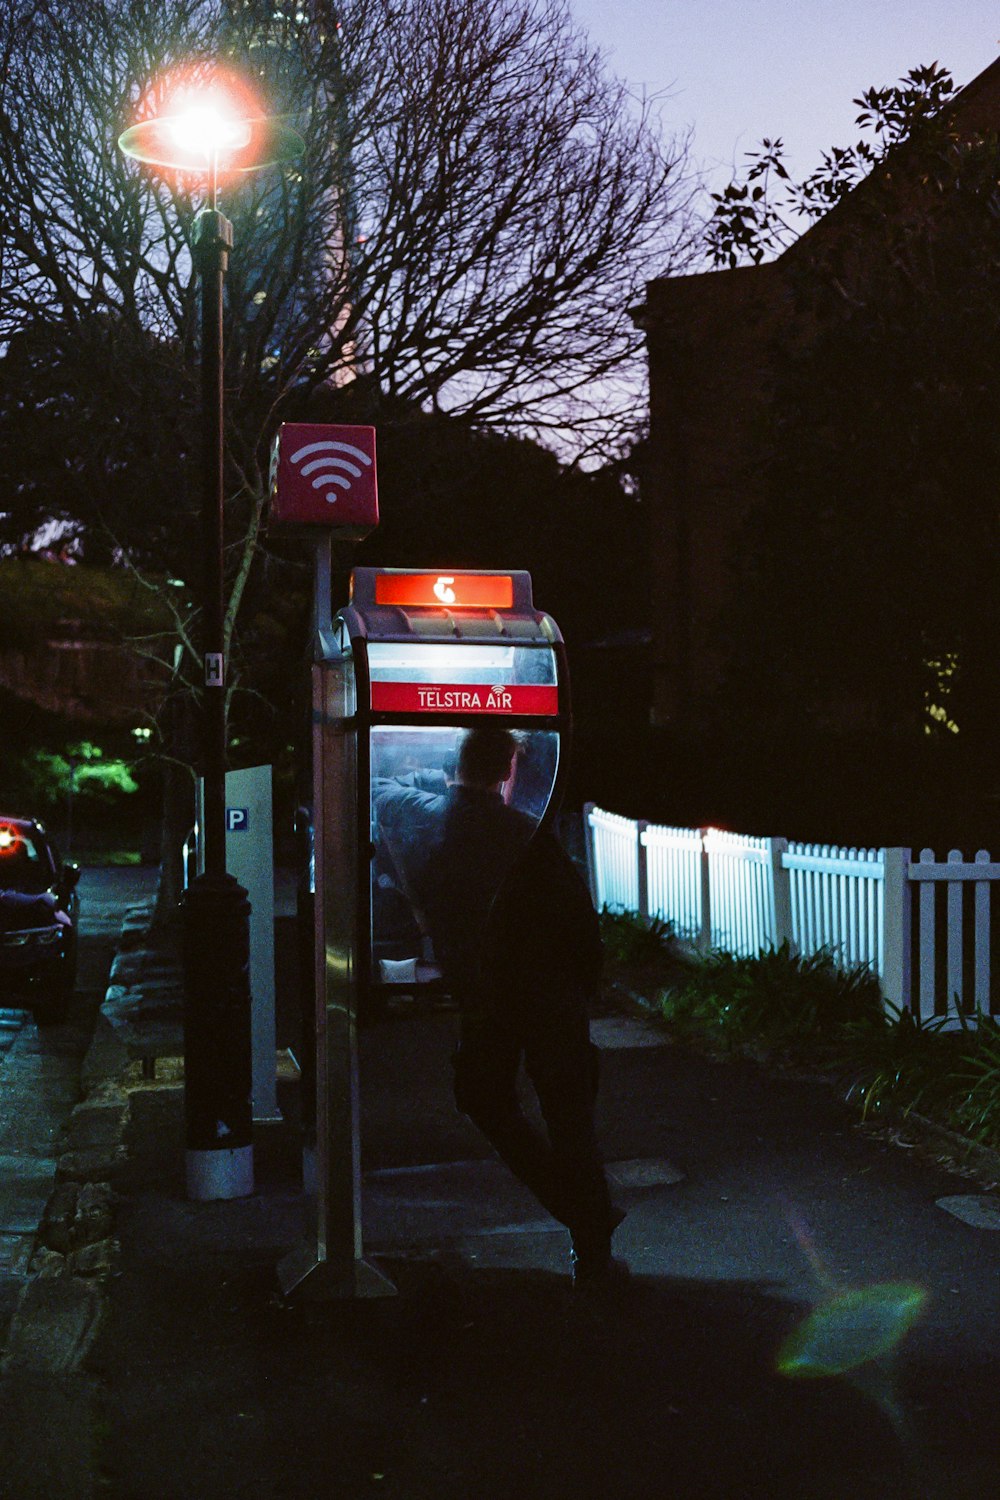 a person standing next to a bus stop